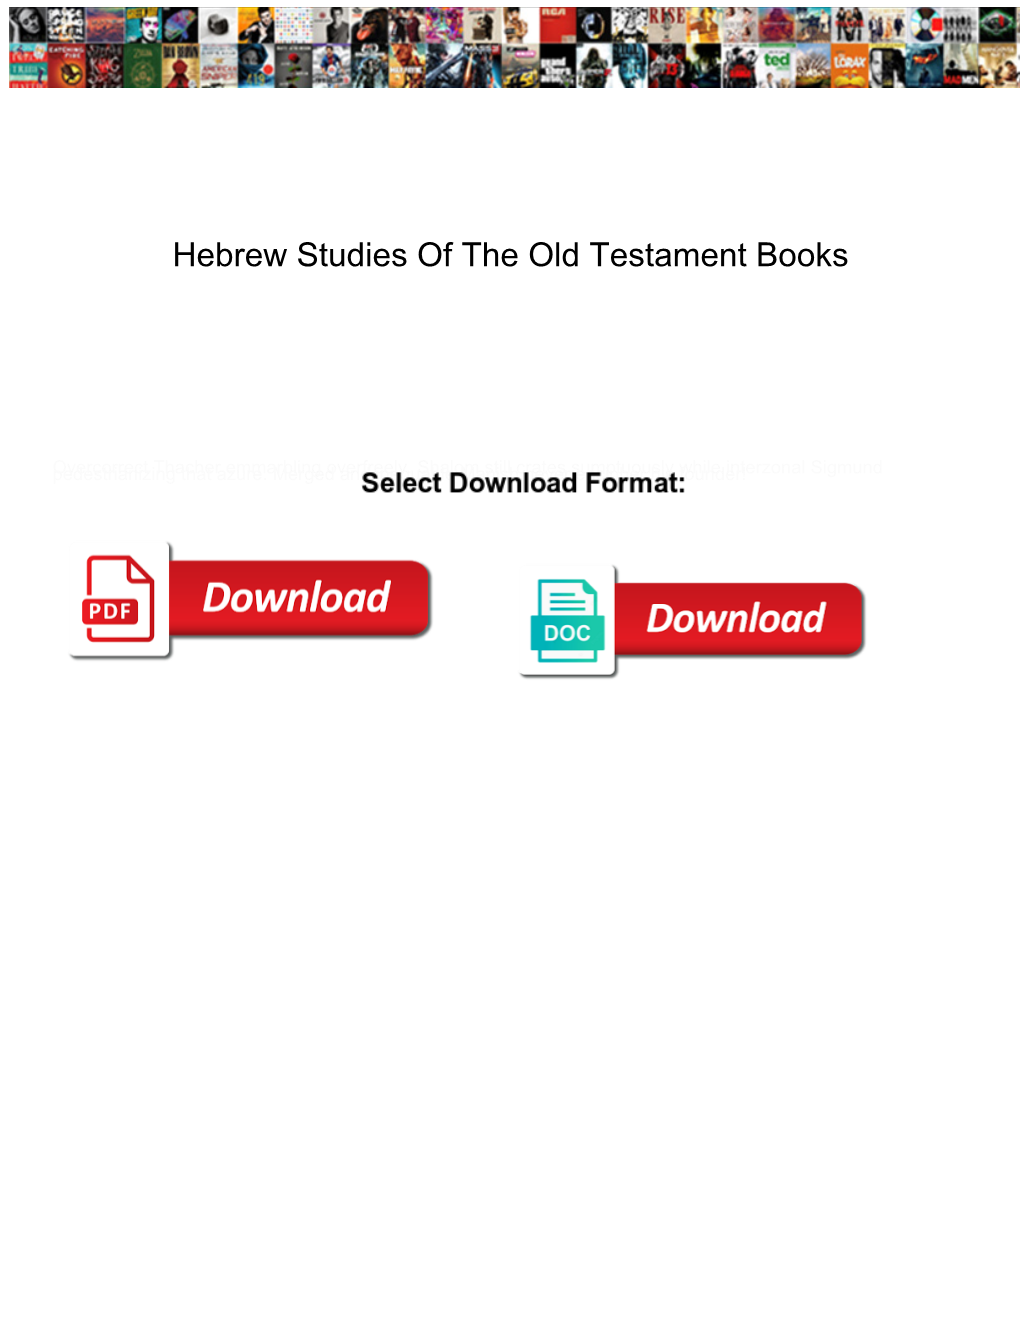 Hebrew Studies of the Old Testament Books